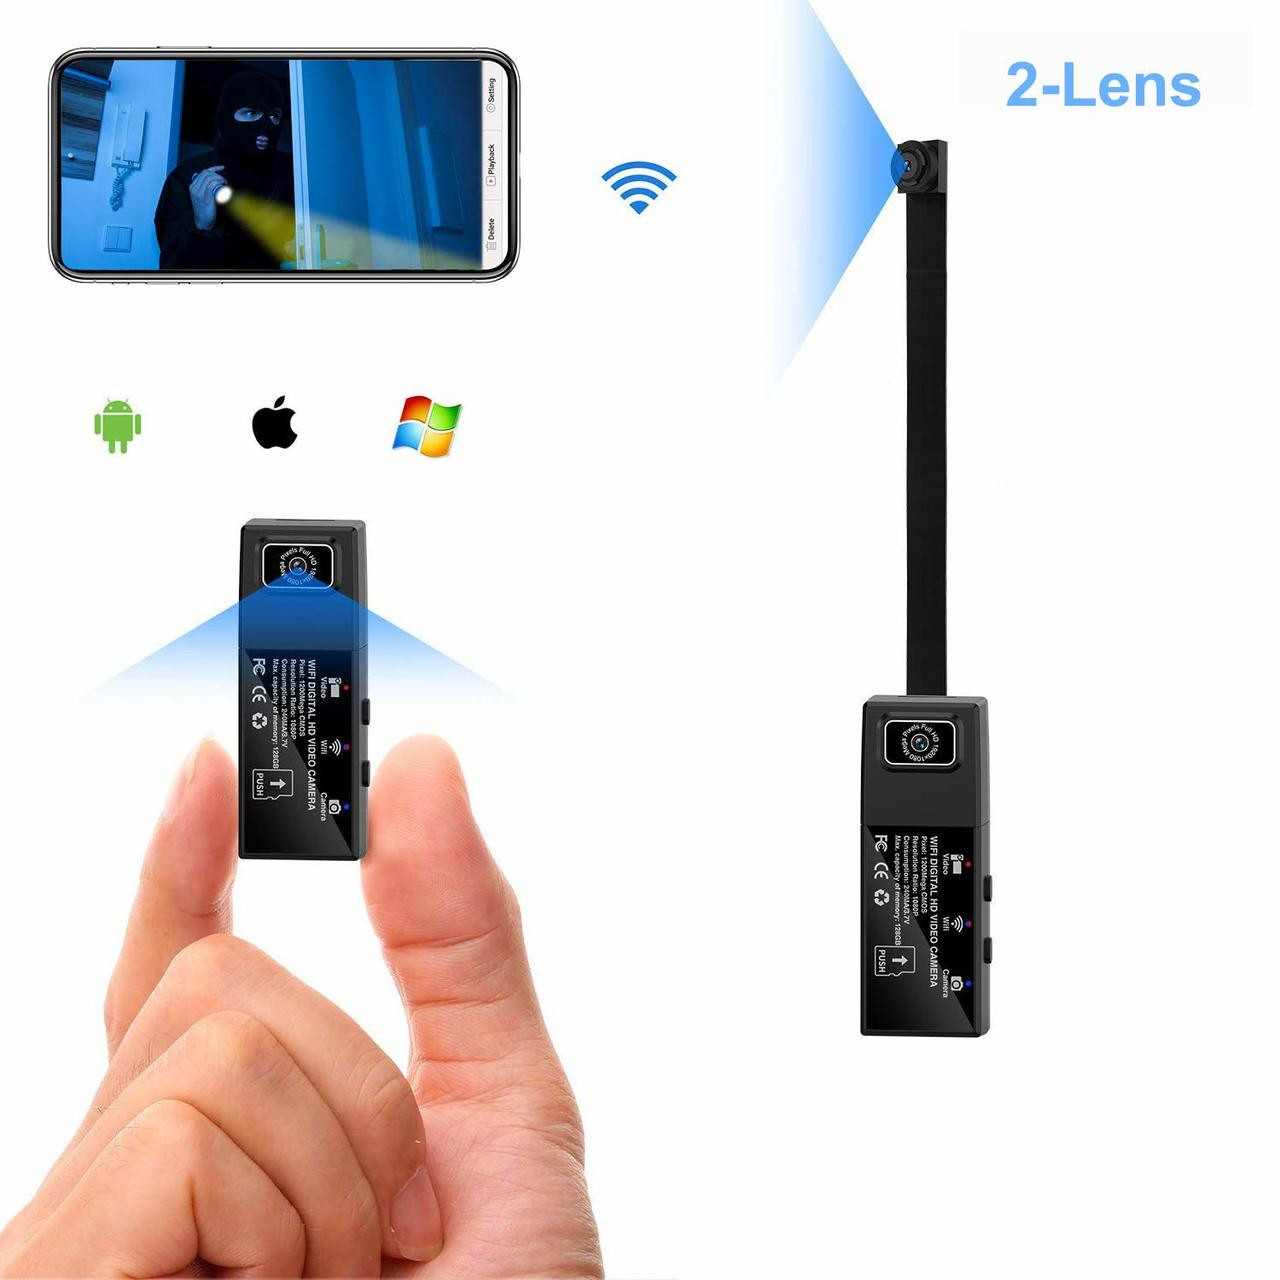 Mini WiFi Hidden Cameras 2022 Mini WiFi Hidden Cameras,Spy Cameras with Audio and Video Live Feed WiFi,1080P Nanny Cams Wireless with Cell Phone App,with Motion Detection IR Night Vision